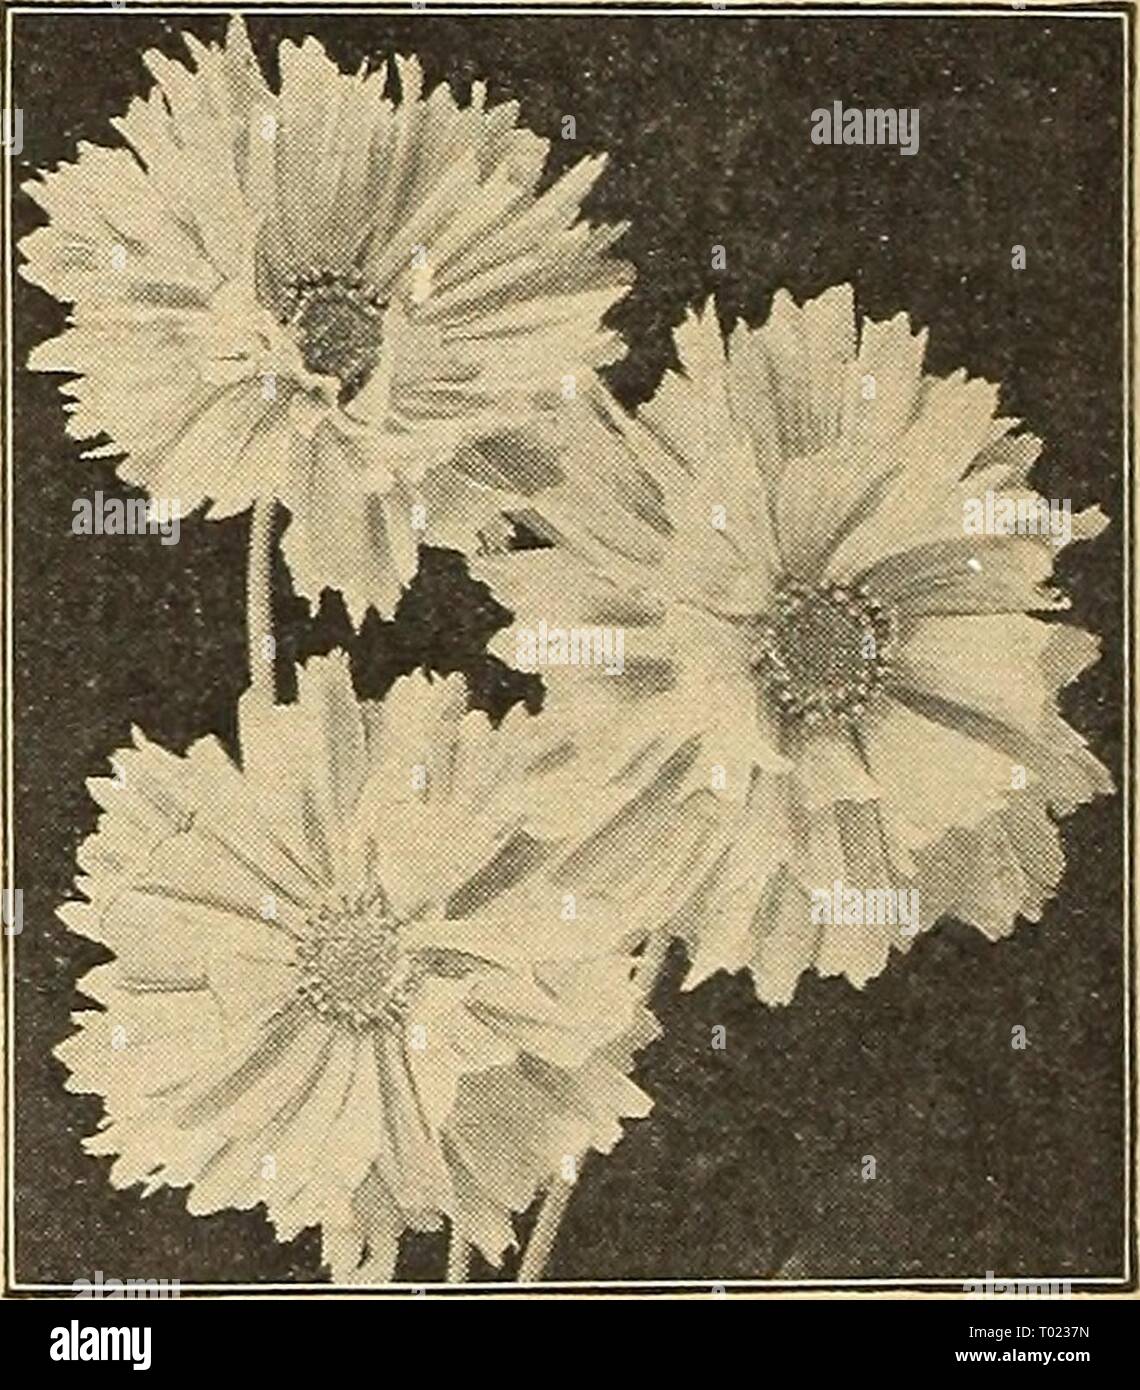 Dreer's garden book for 1943 . dreersgardenbook1943henr Year: 1943  Cremer s Prize Strain Cineraria 1954 Cremer's Wilt-Resistant Prize-Strain of Cineraria This splendid new strain of Cineraria has many outstanding features that rec- ommend it to those who have the facili- ties to grow this showy plant. Produces a mass of blooms in many exceptional, choice colors. Pkt. 50c; originator's large pkg. $2.25. 1957 Siter's Rainbow Strain Medium sized flowers of bright and pastel shades. Pkt. 75c; originator's large pkt. $3.00. Clarkia elegans fl. pi. ® This pretty and easily grown annual has been muc Stock Photo